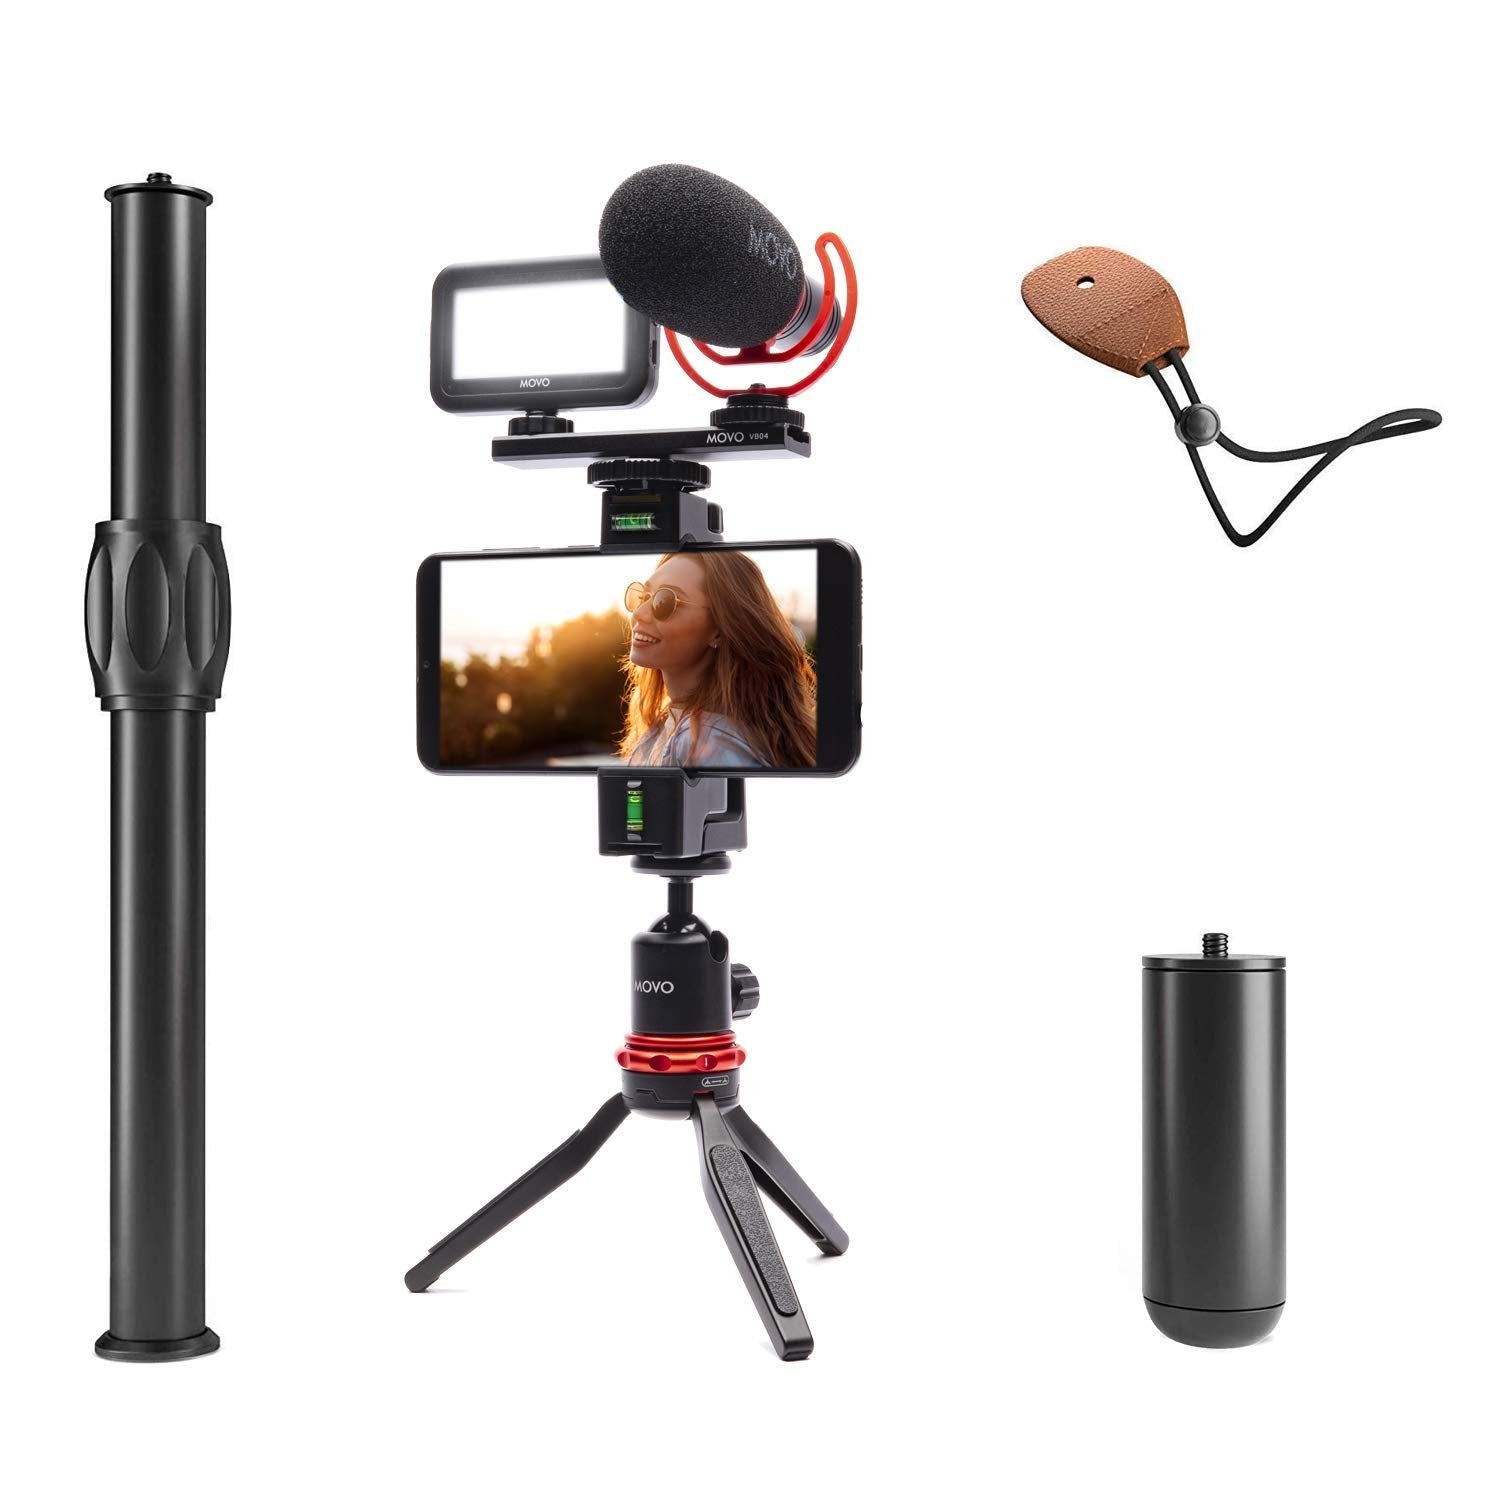 Movo VXR10-PRO+ Smartphone Video Rig with Pro Video Microphone, LED Light, Mini Tripod, Phone - Shotgun Microphone for iPhone 11, 11 Pro Max, SE, XS, XR, X, Android Devices, and More